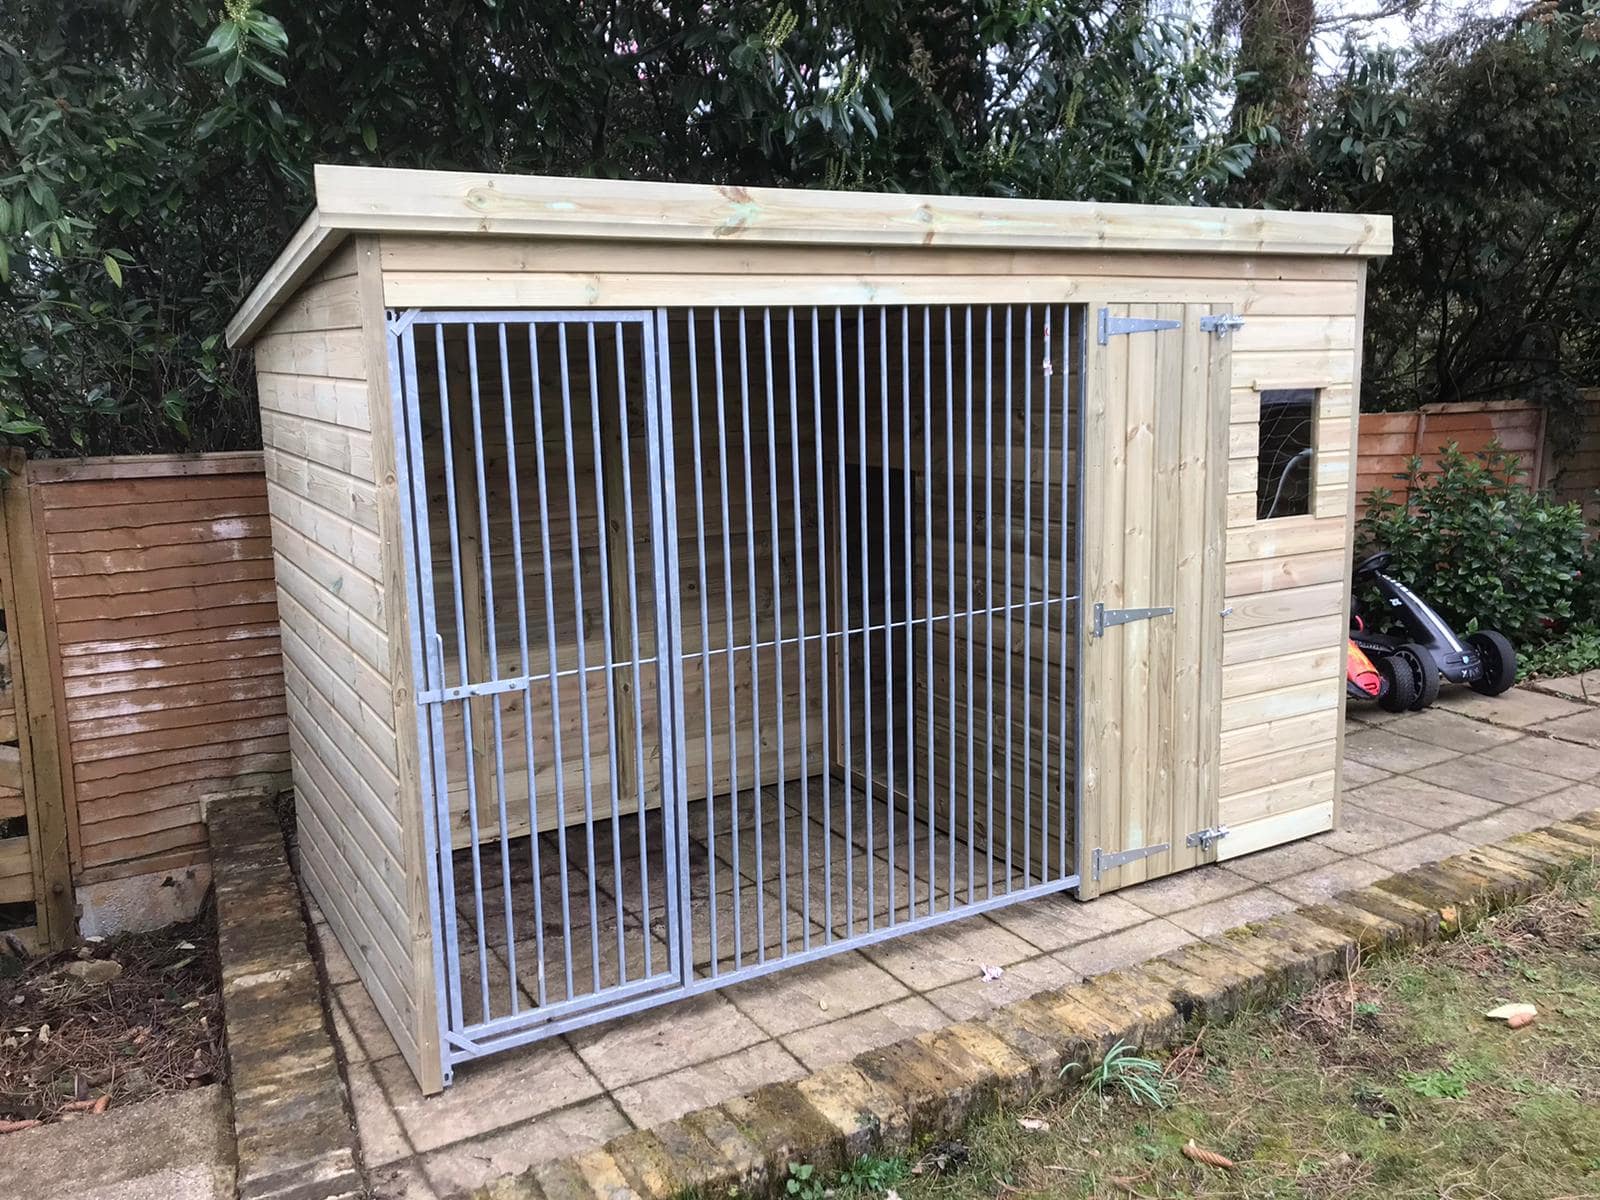 Stapeley Wooden Dog Kennel And Run 8ft (wide) x 4ft (deep) x 6'6ft (high)